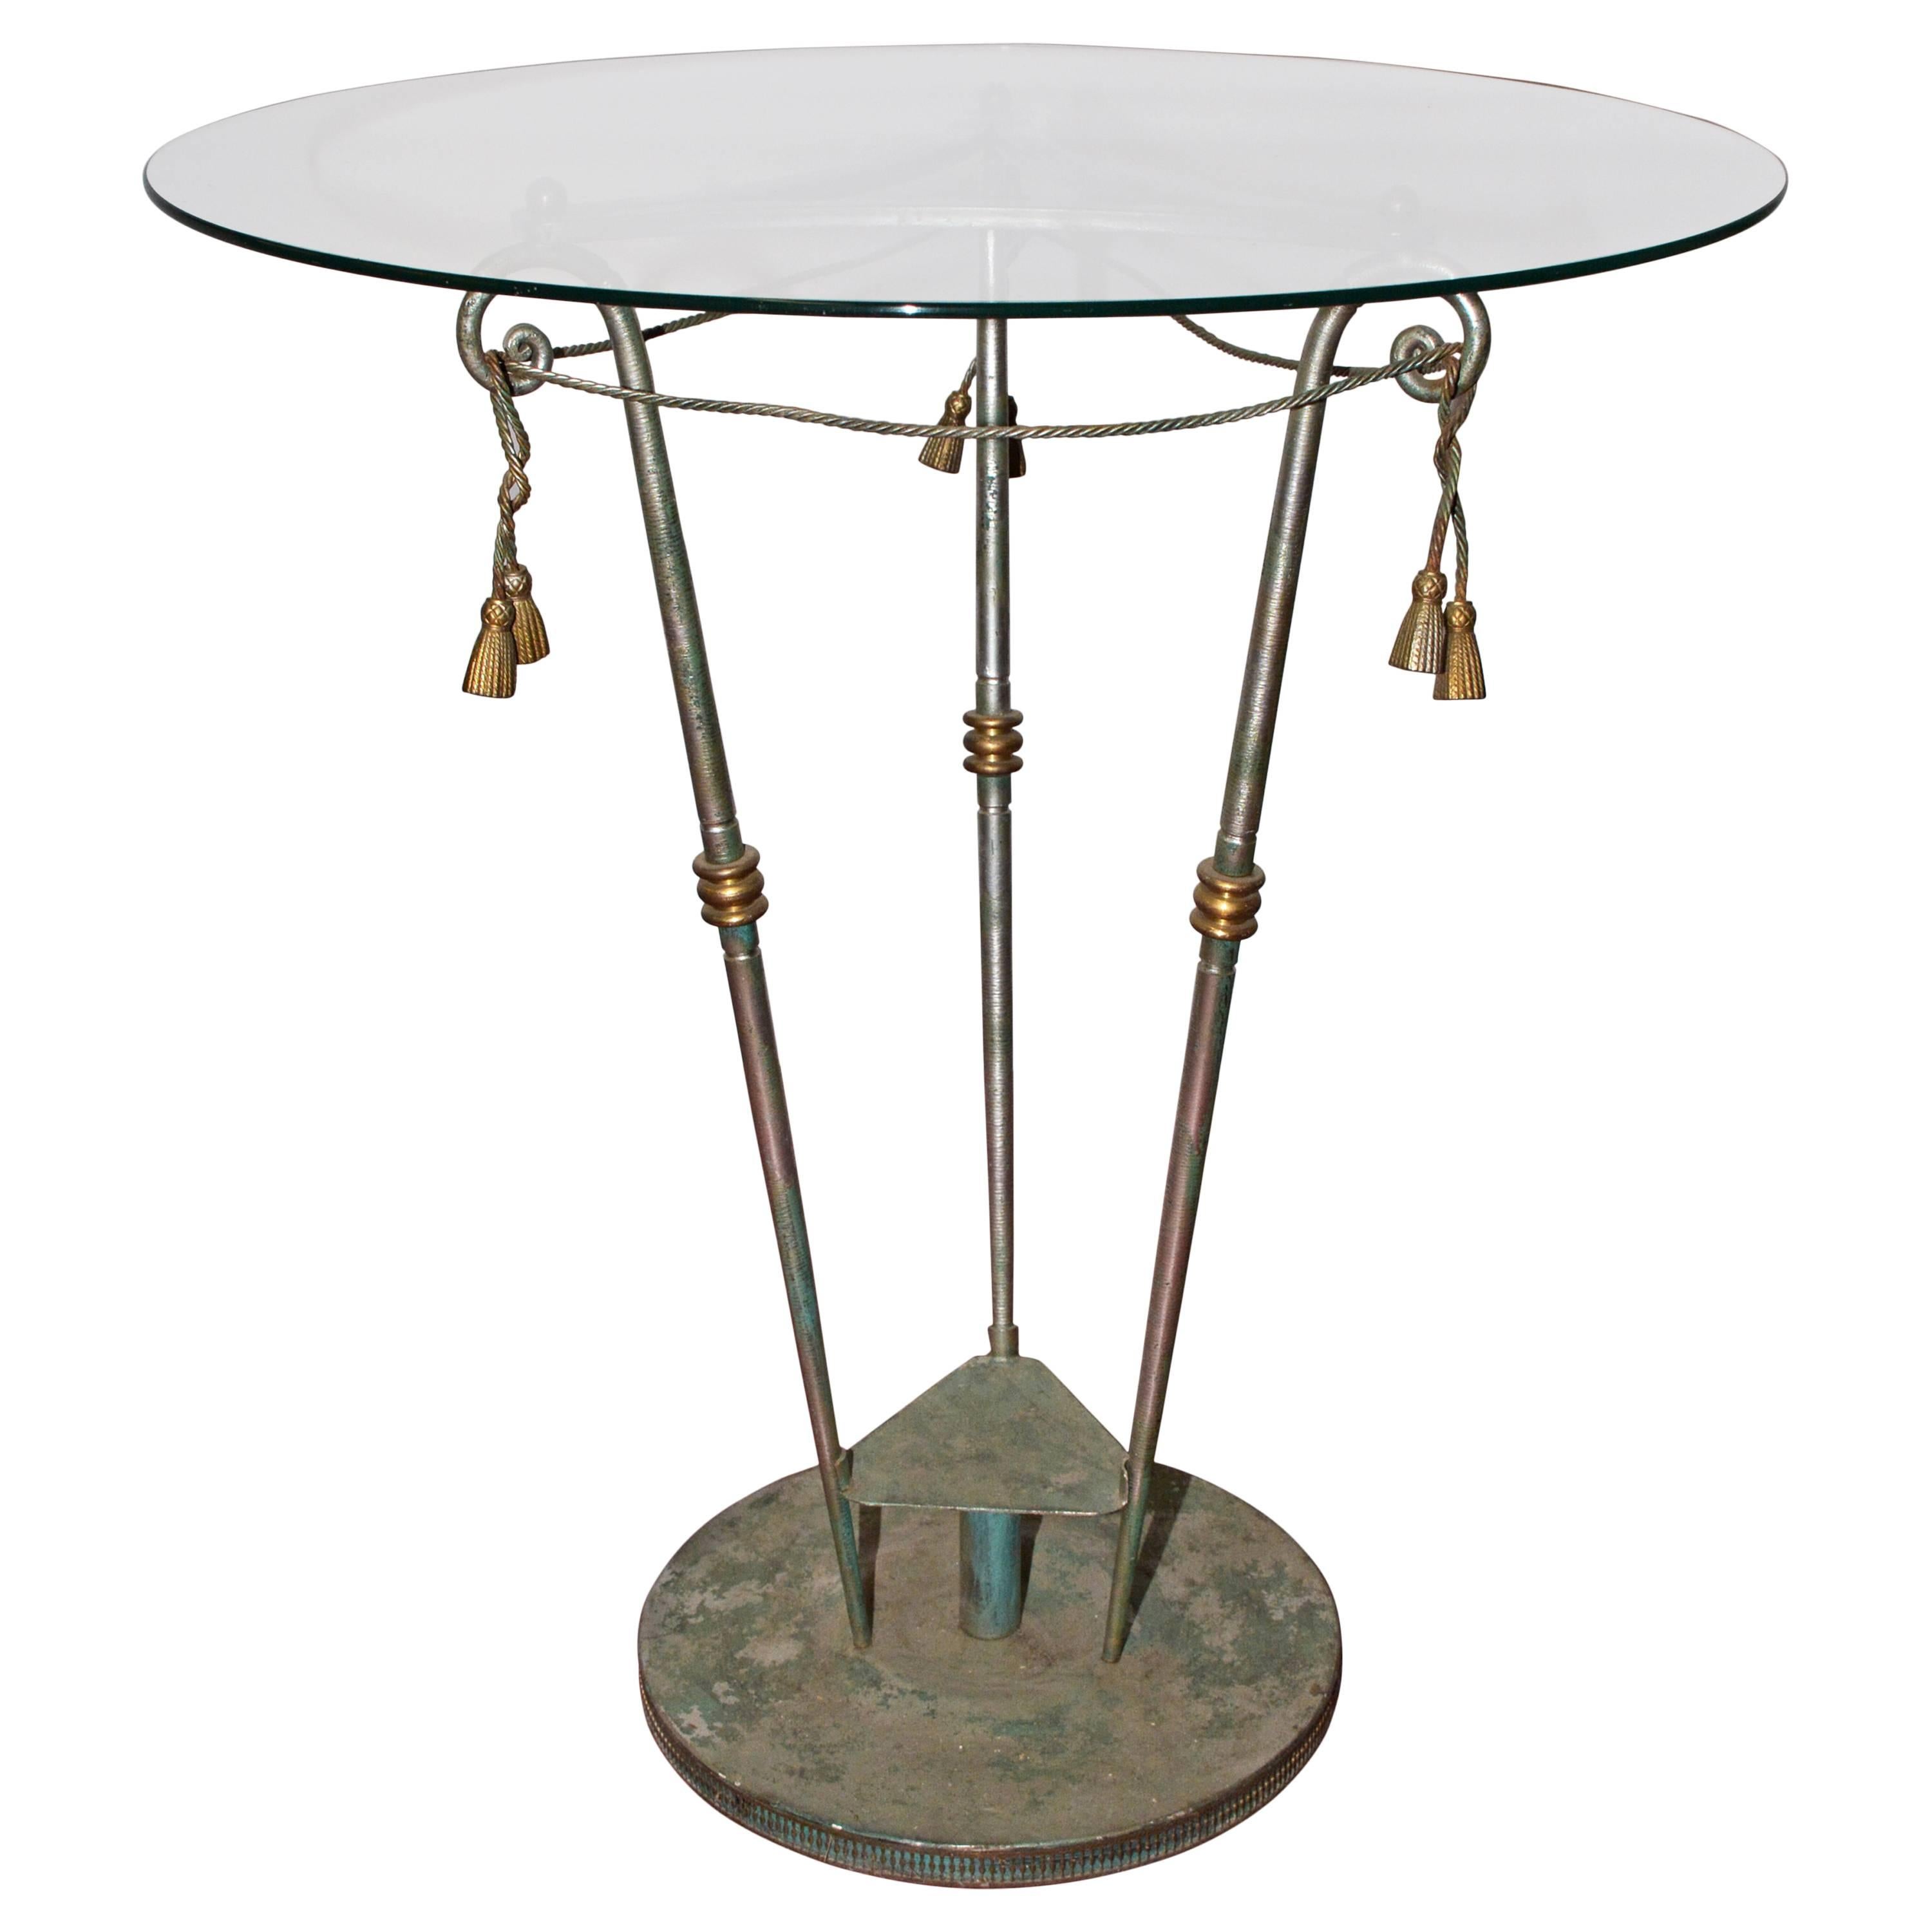 Neoclassical Iron and Glass Center Table